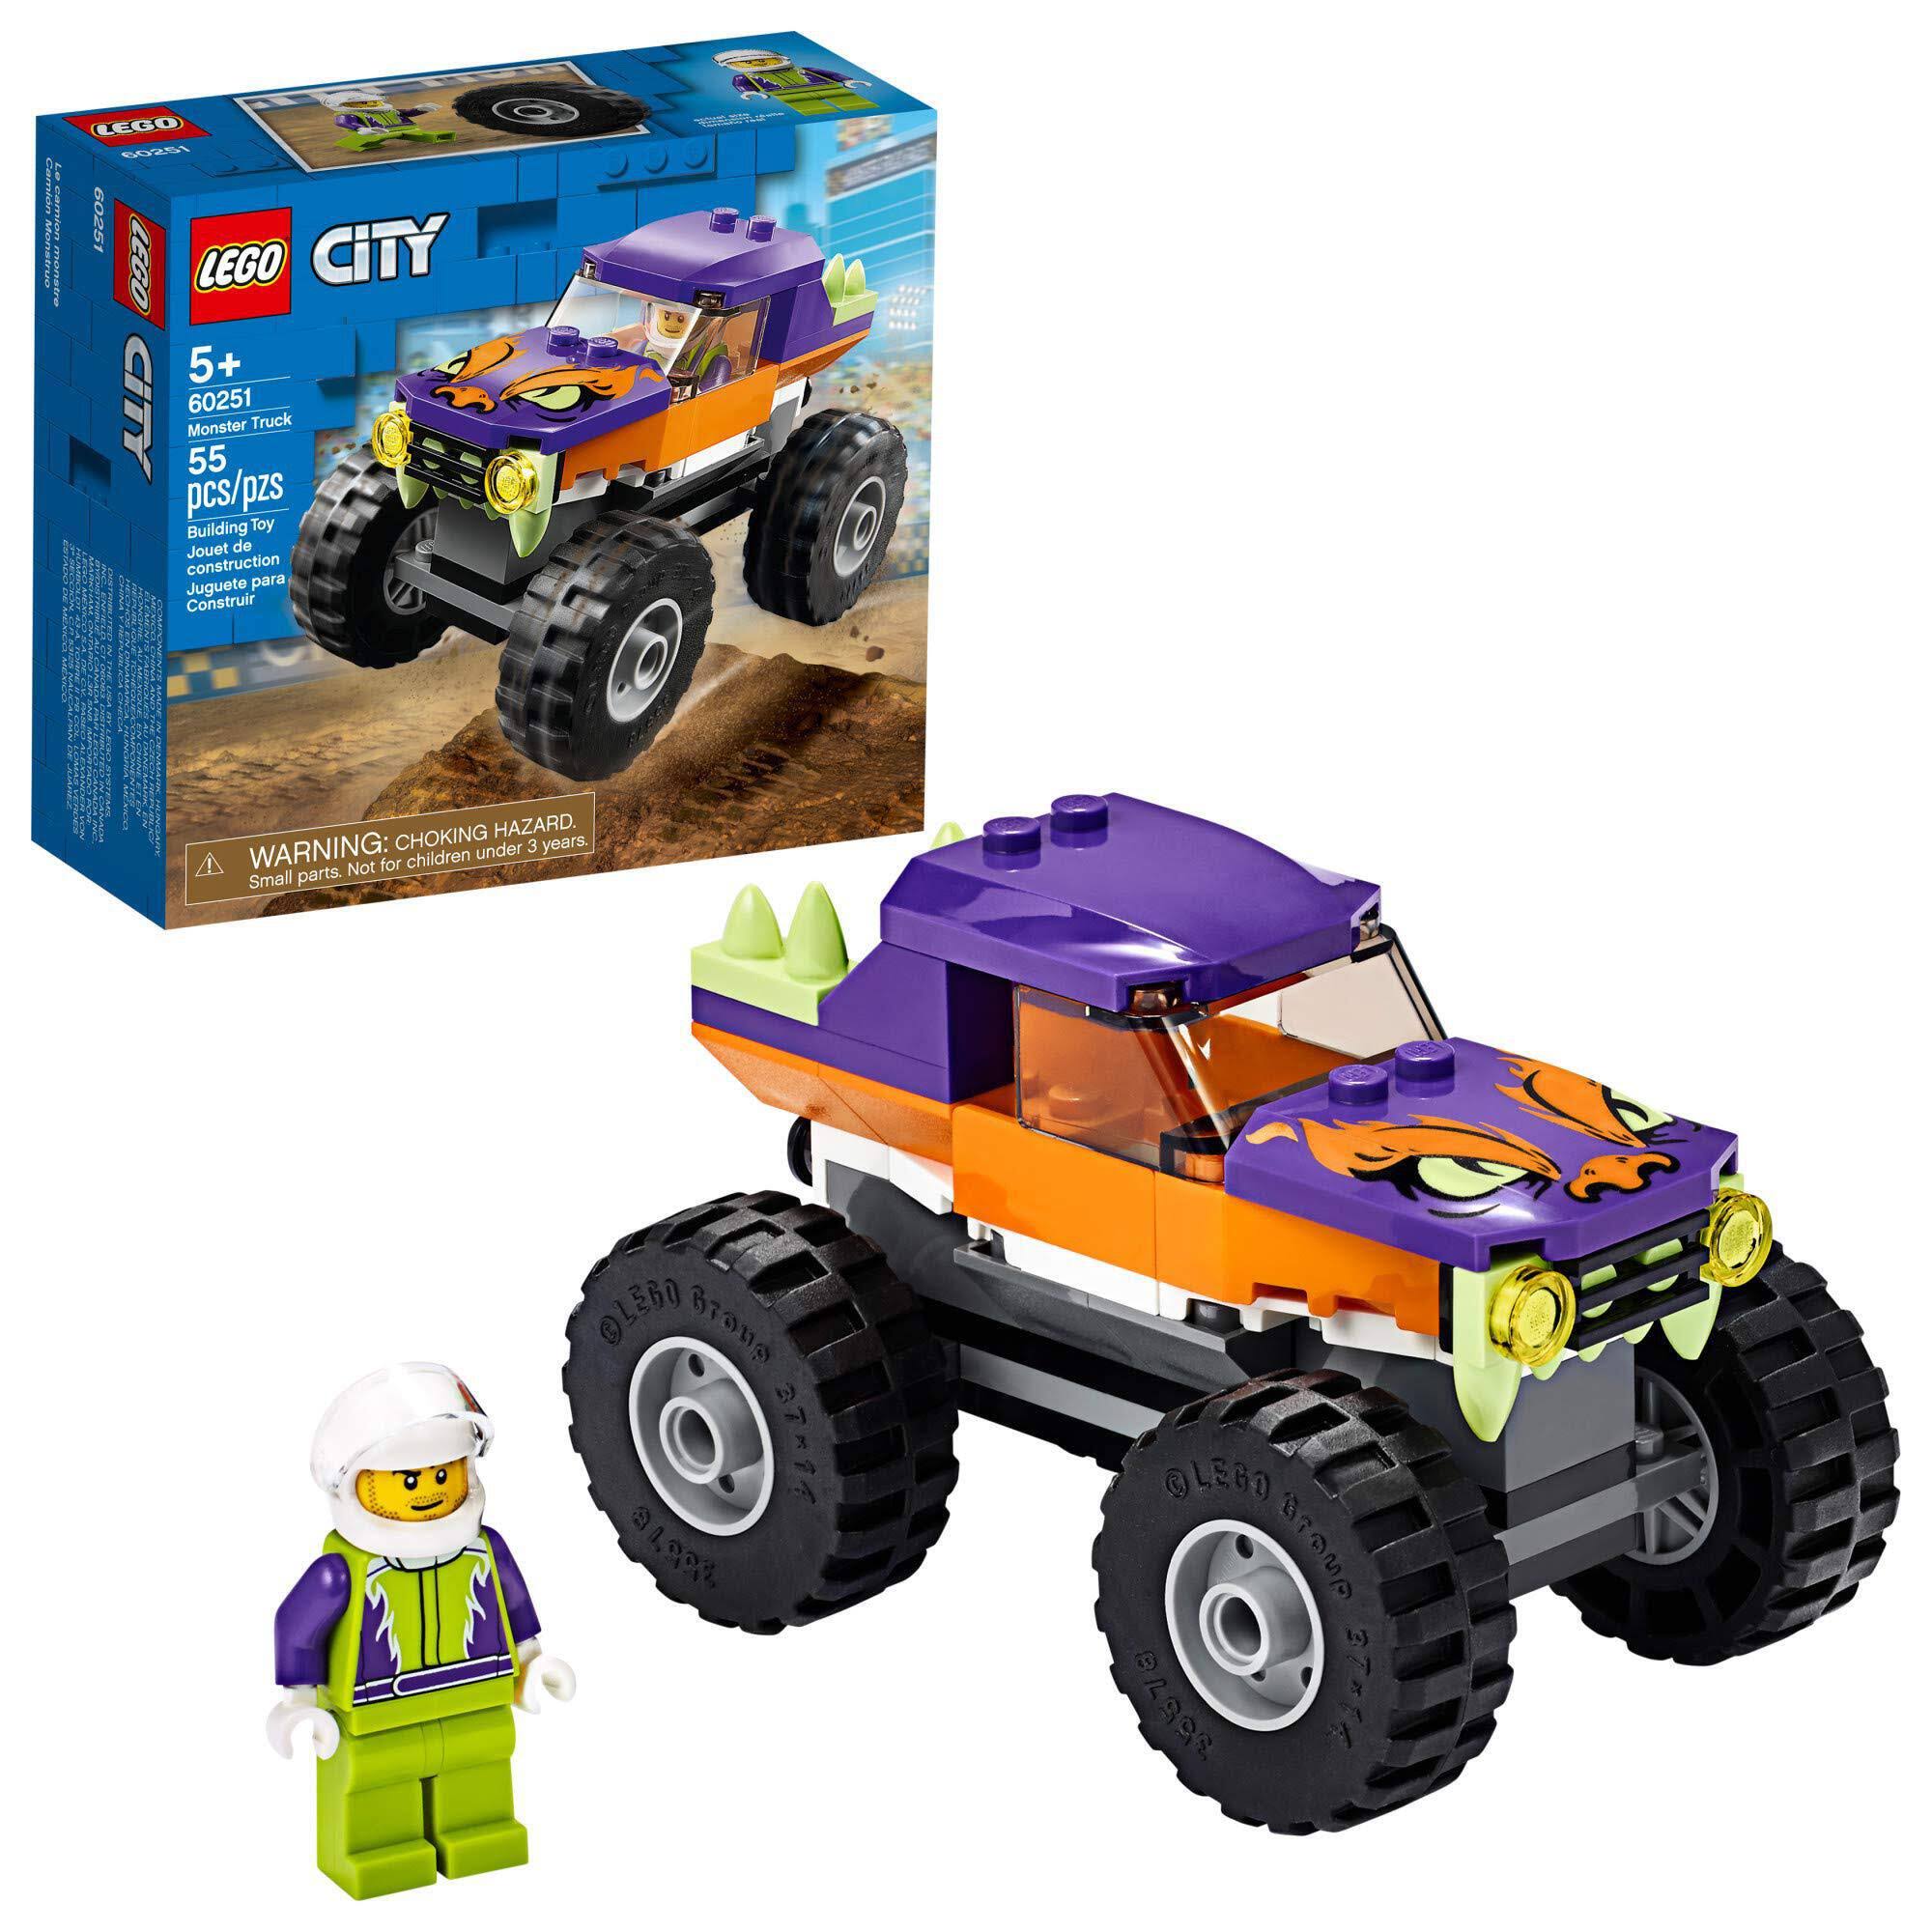 LEGO City Monster Truck 60251 Building Sets For Kids (55 Pieces)